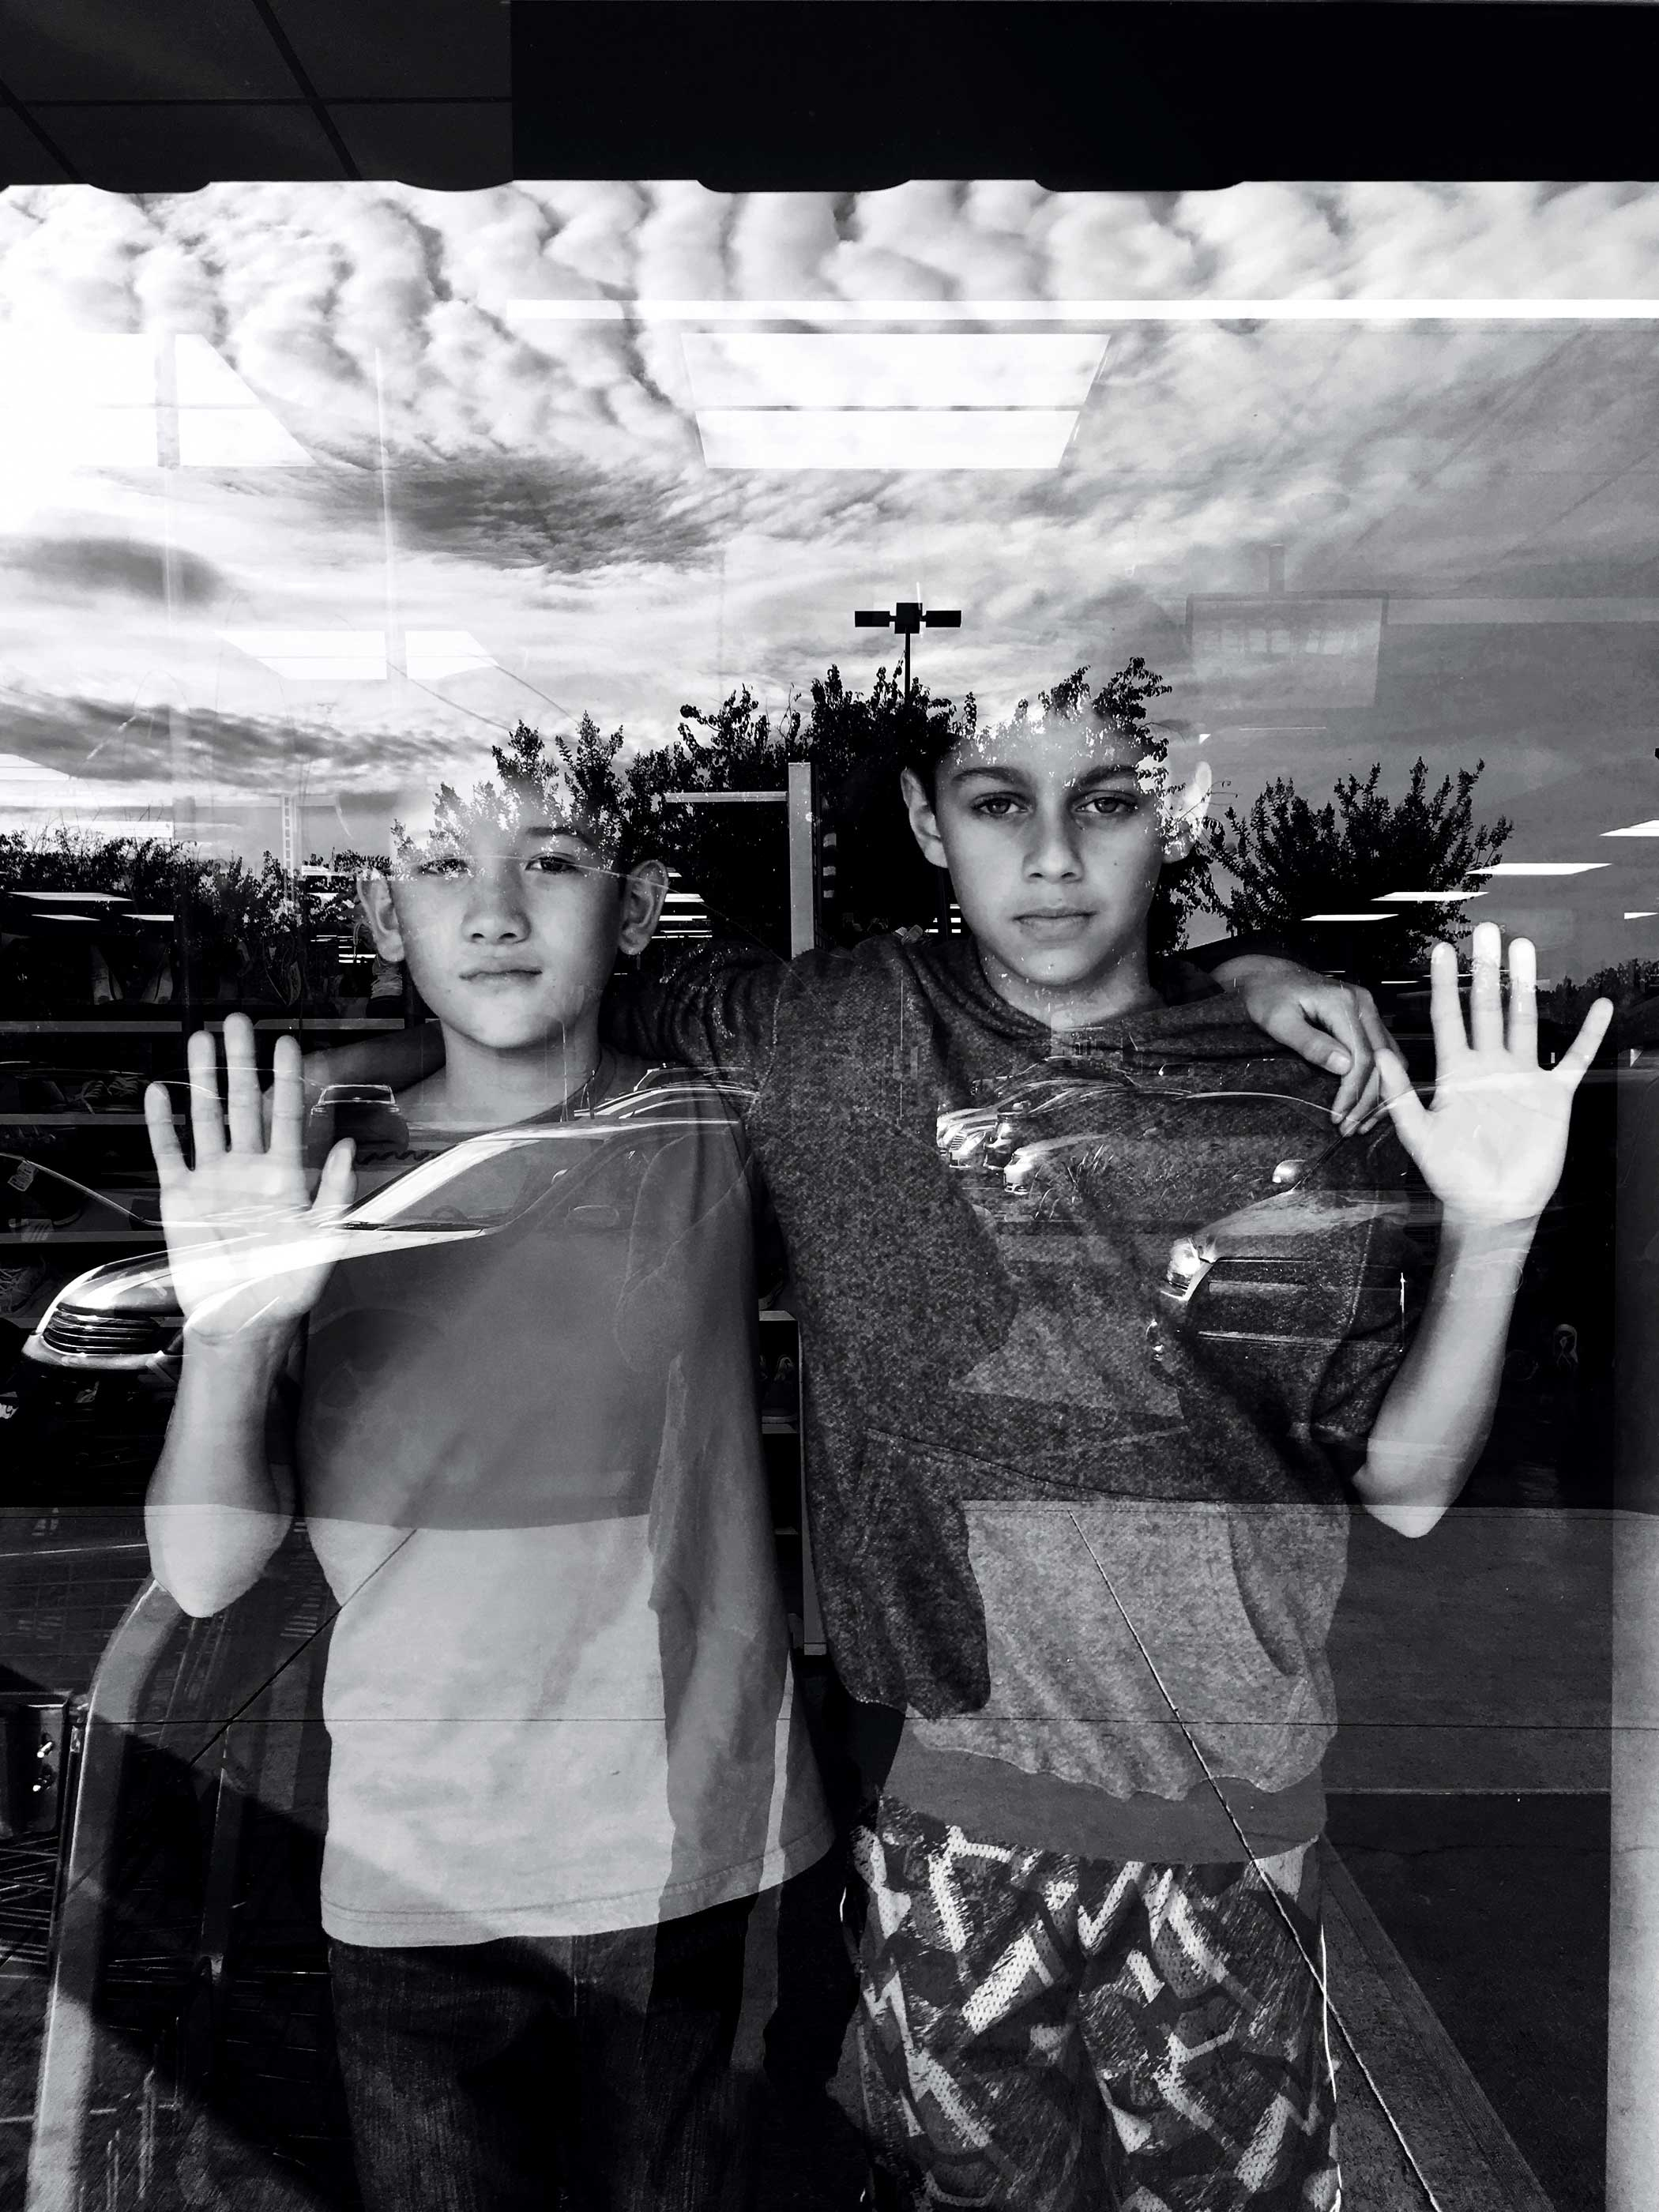 Location: Strip Mall in Castro Valley, Calif.
                              Subject: Son and friend Photograph shot with iPhone 6s, used VSCO